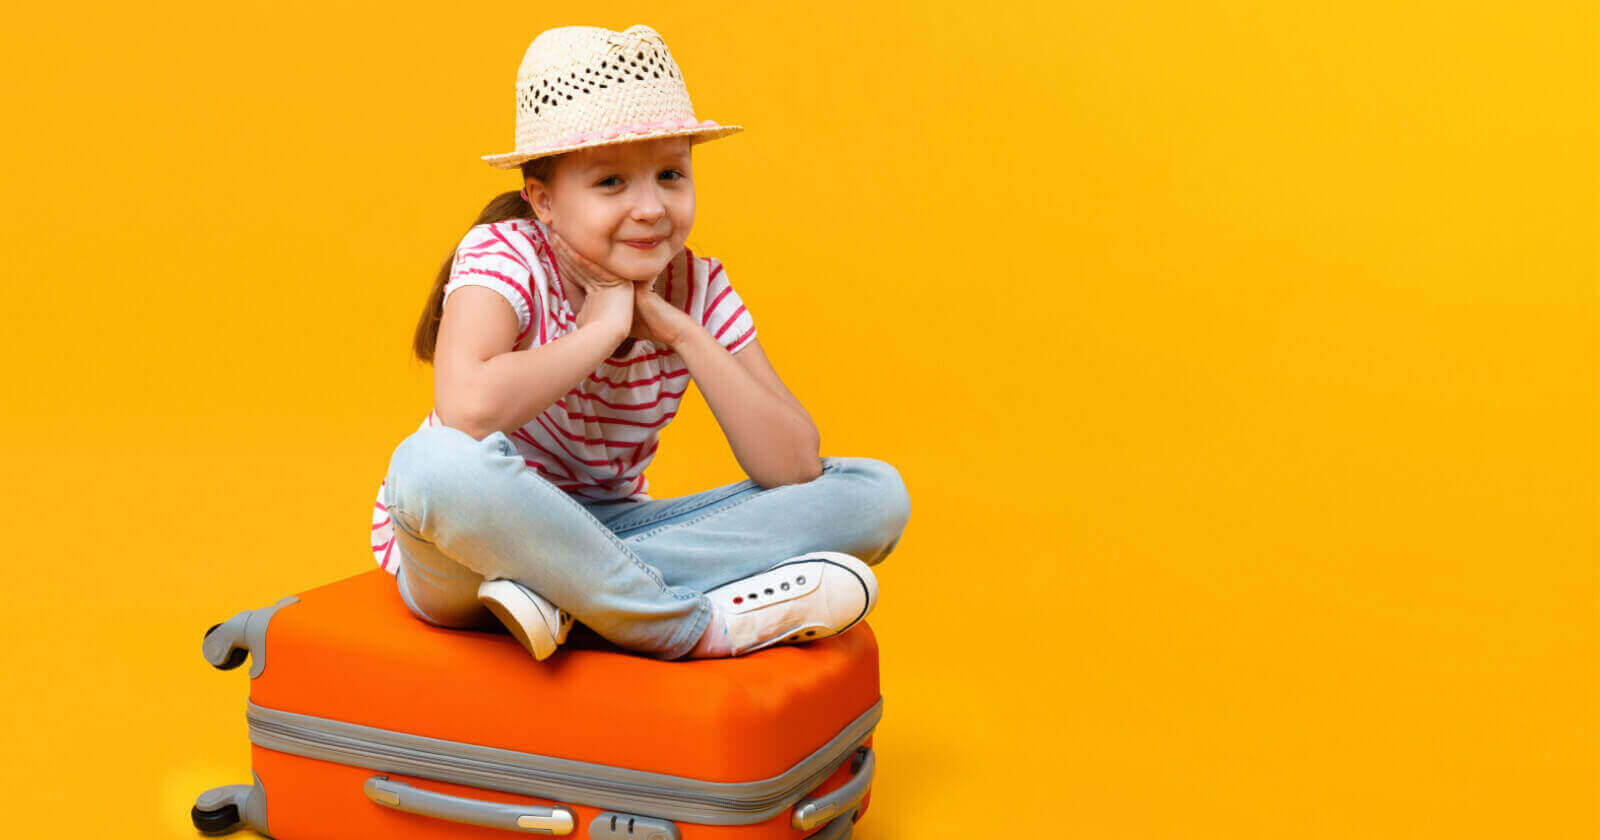 Packing tips for traveling with kids